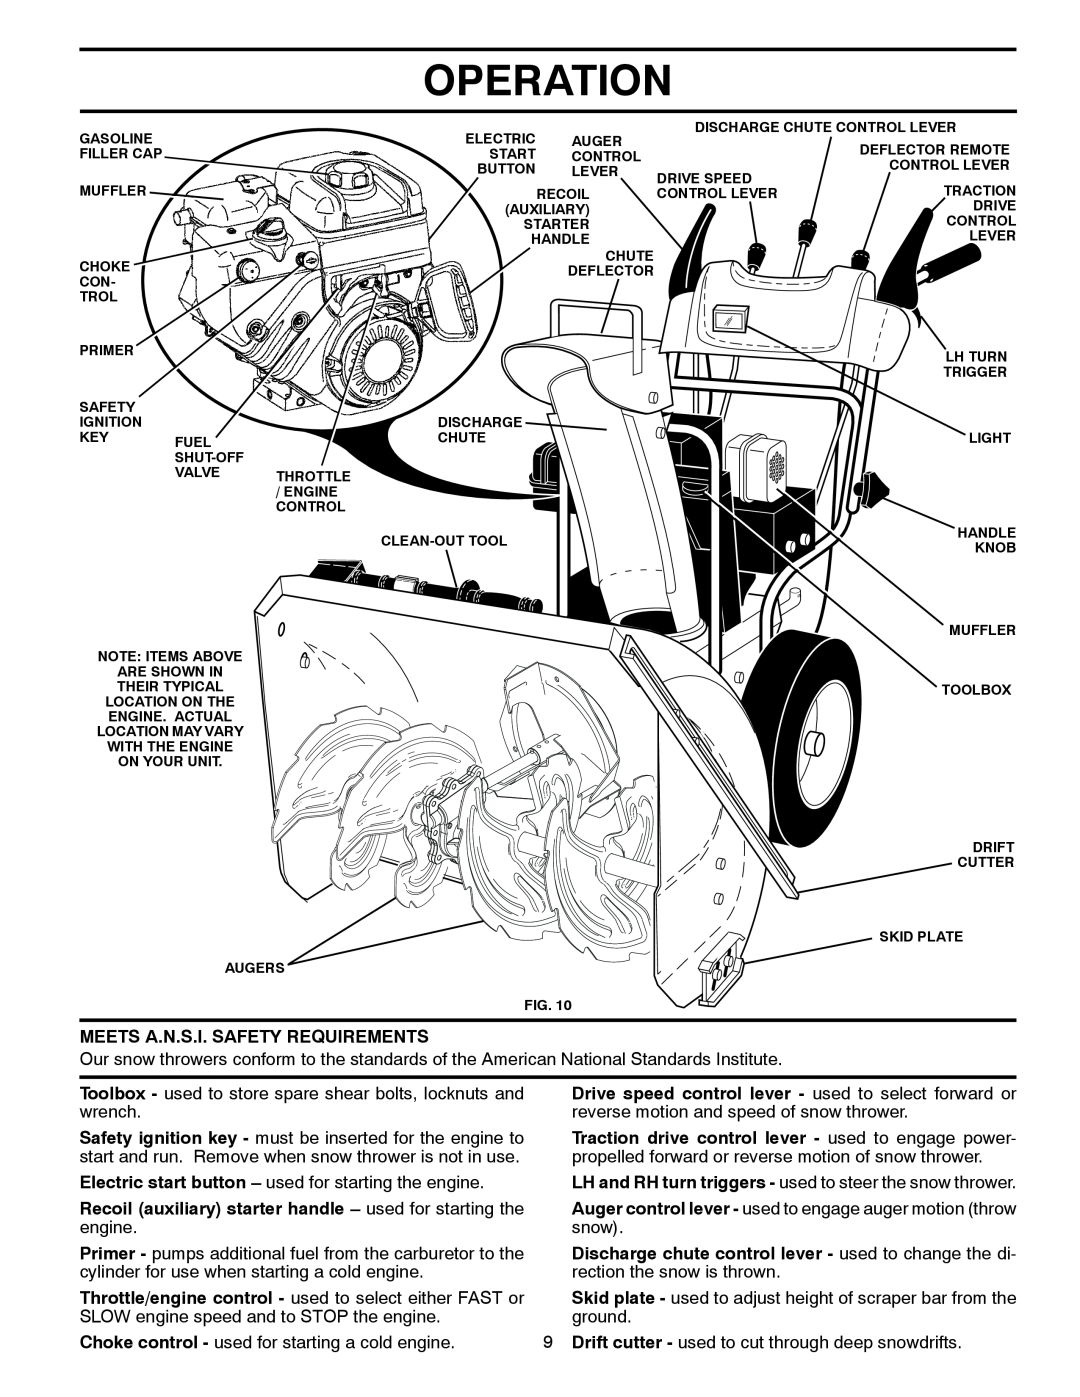 Husqvarna 13524SB-XLS owner manual Operation, Meets A.N.S.I. Safety Requirements 